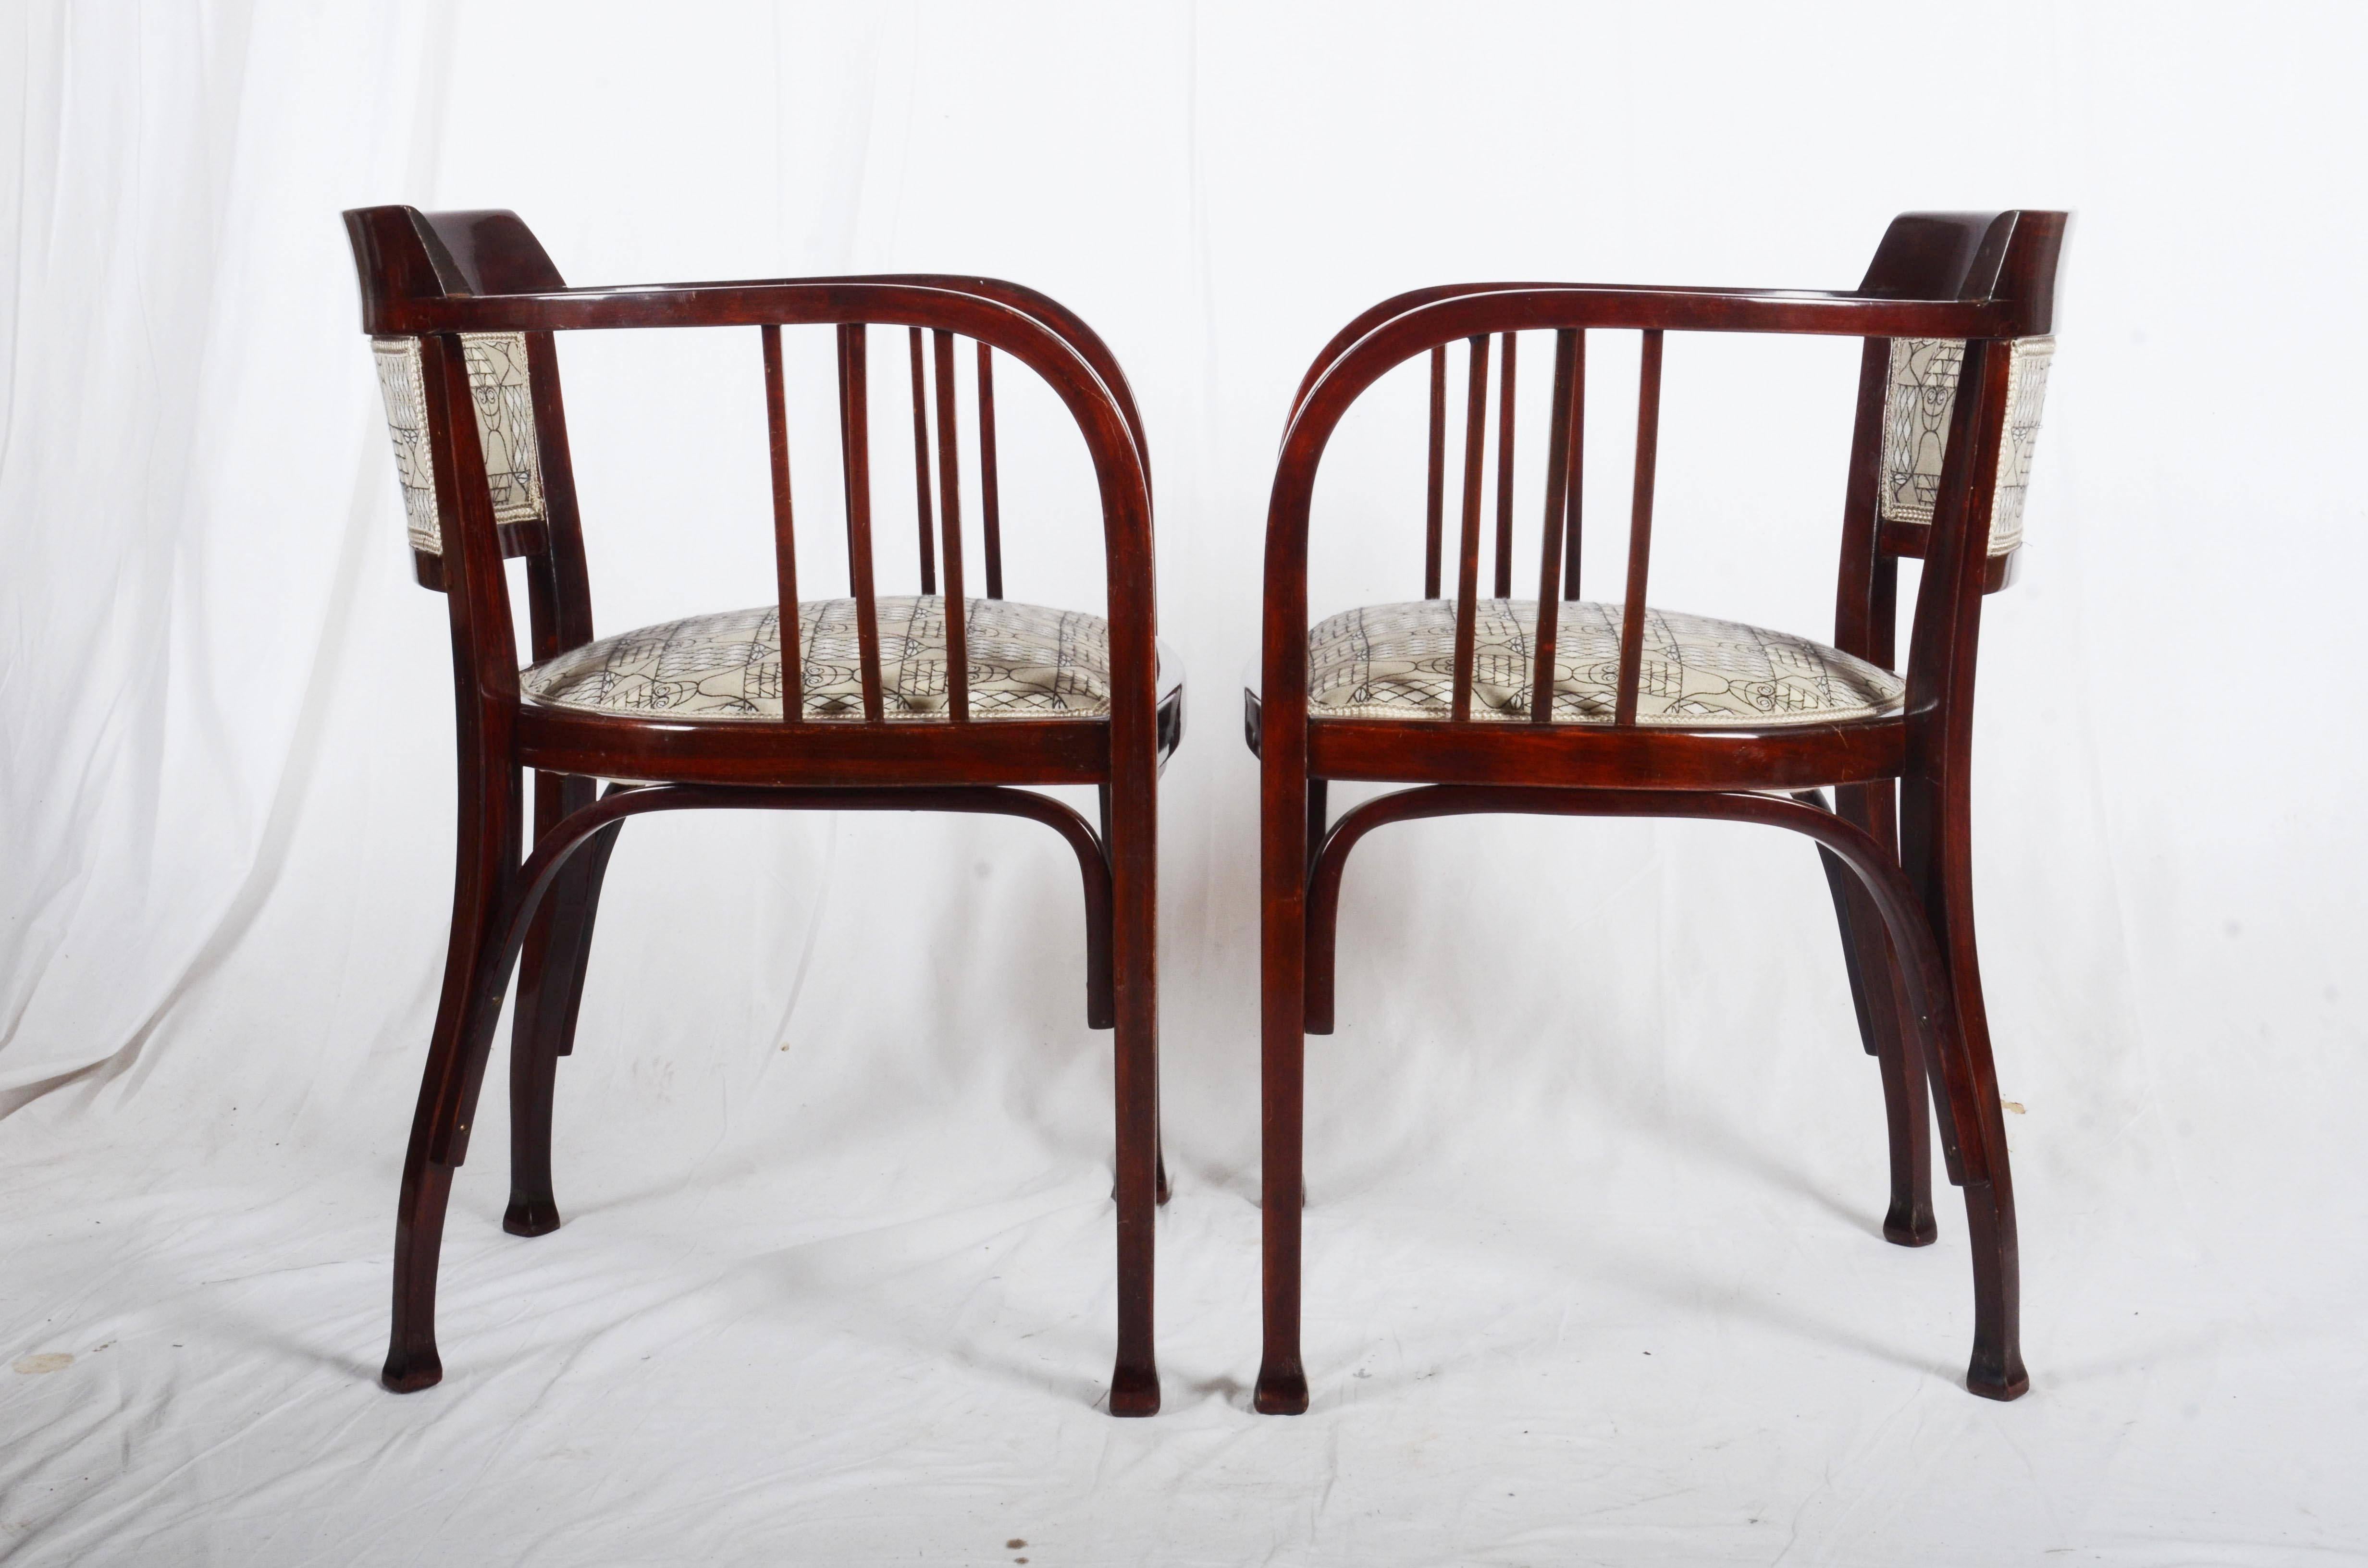 Beach bentwood design by Otto Wagner about 1900
The fabric on the chairs is obsolete but I can offer you huge range Vienna Secession fabrics instad of.
Delivery time 5-6 weeks

 